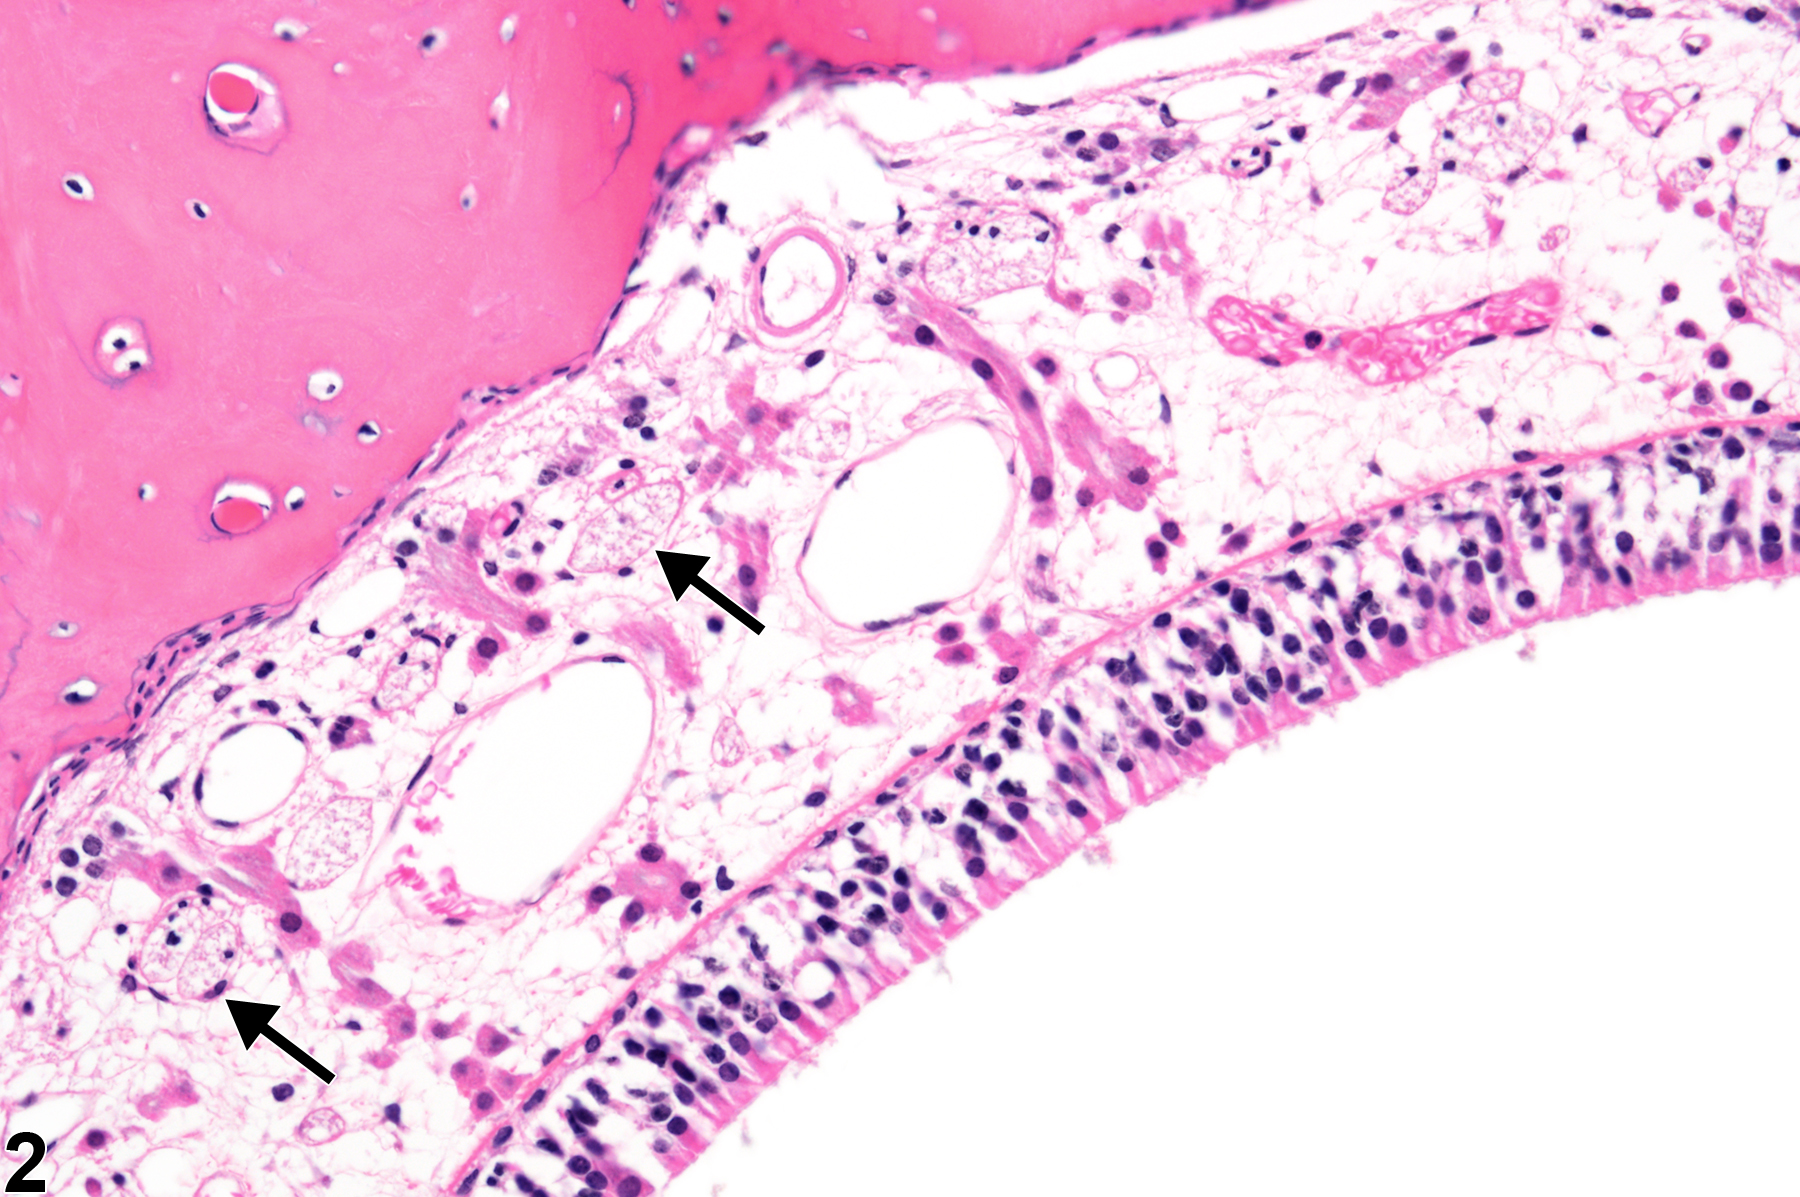 Image of atrophy in the nose from a female F344/N rat in a subchronic study